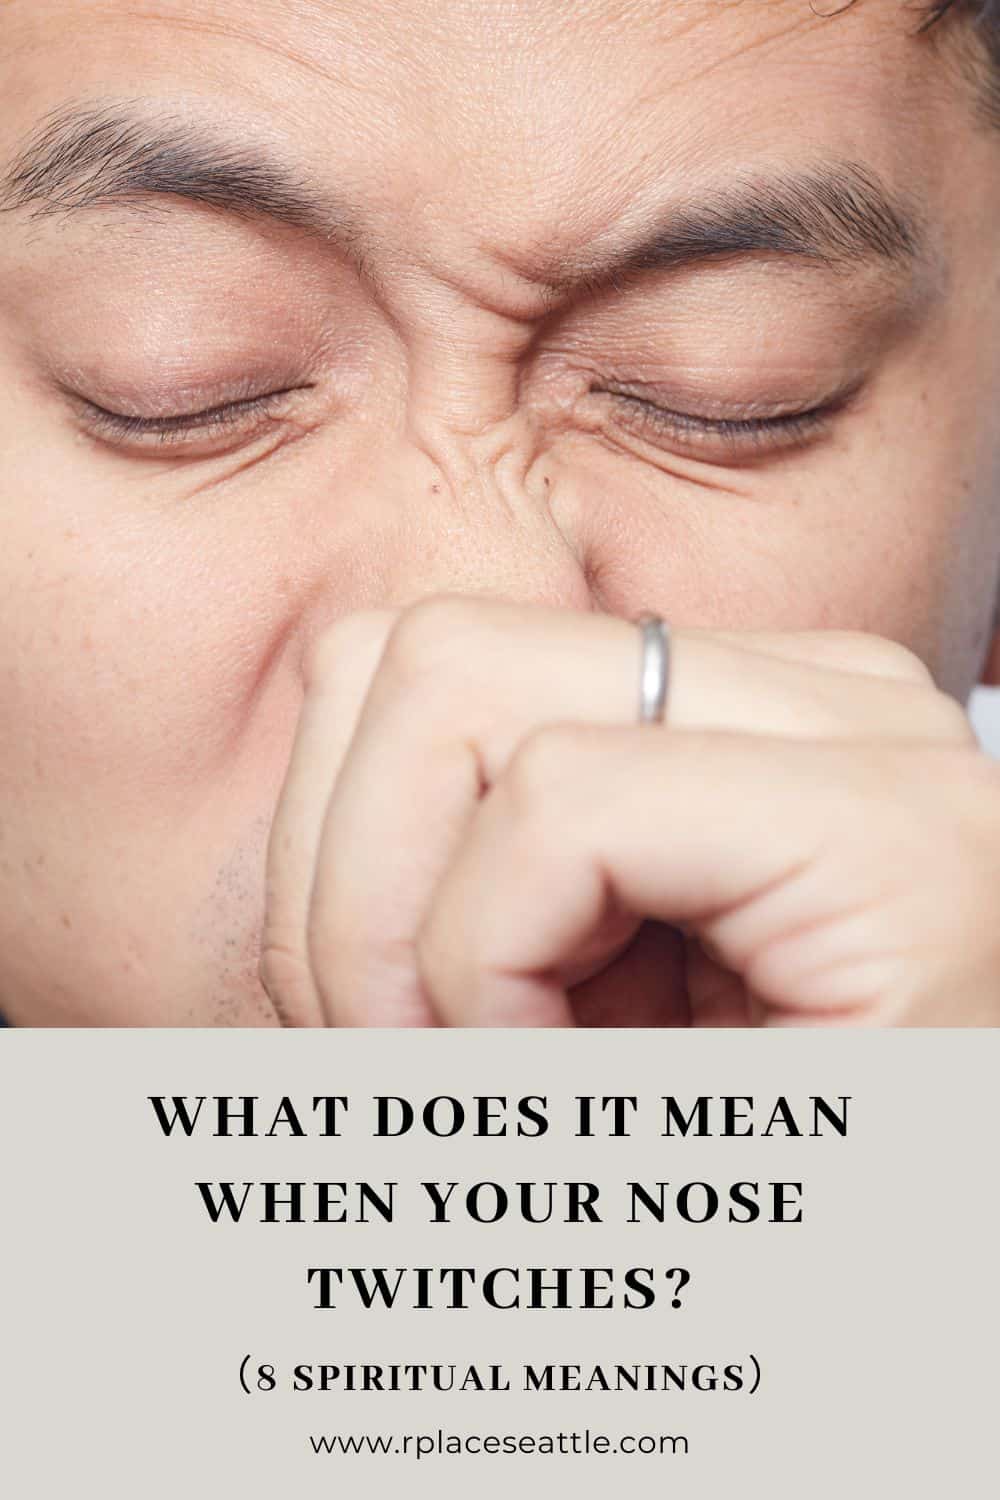 8 Spiritual meanings of your nose twitching